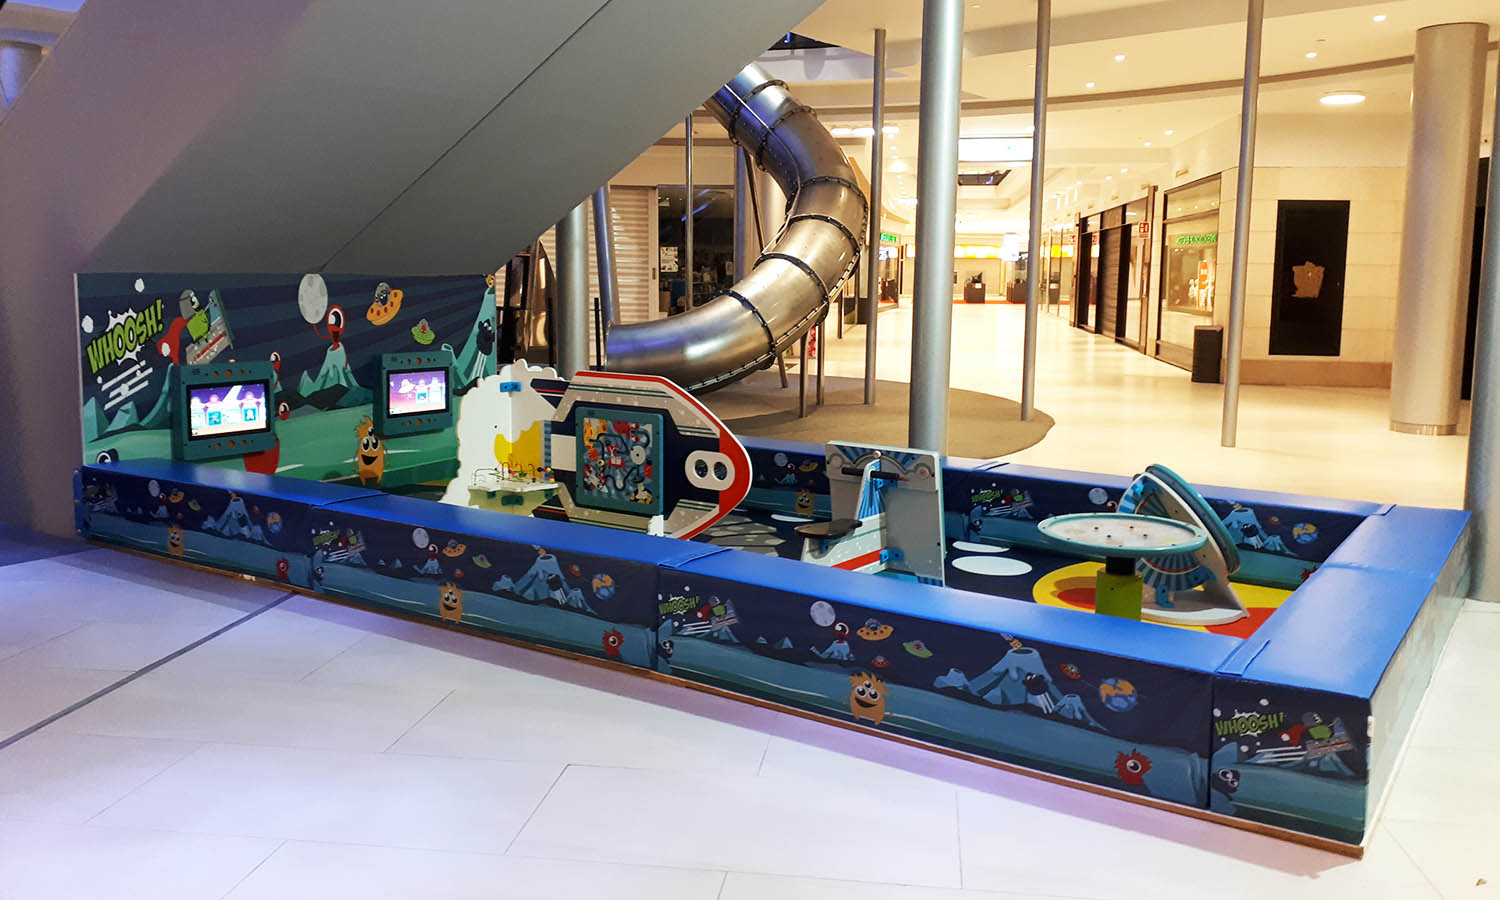 This image shows a custom kids corner within a shopping center in Spain